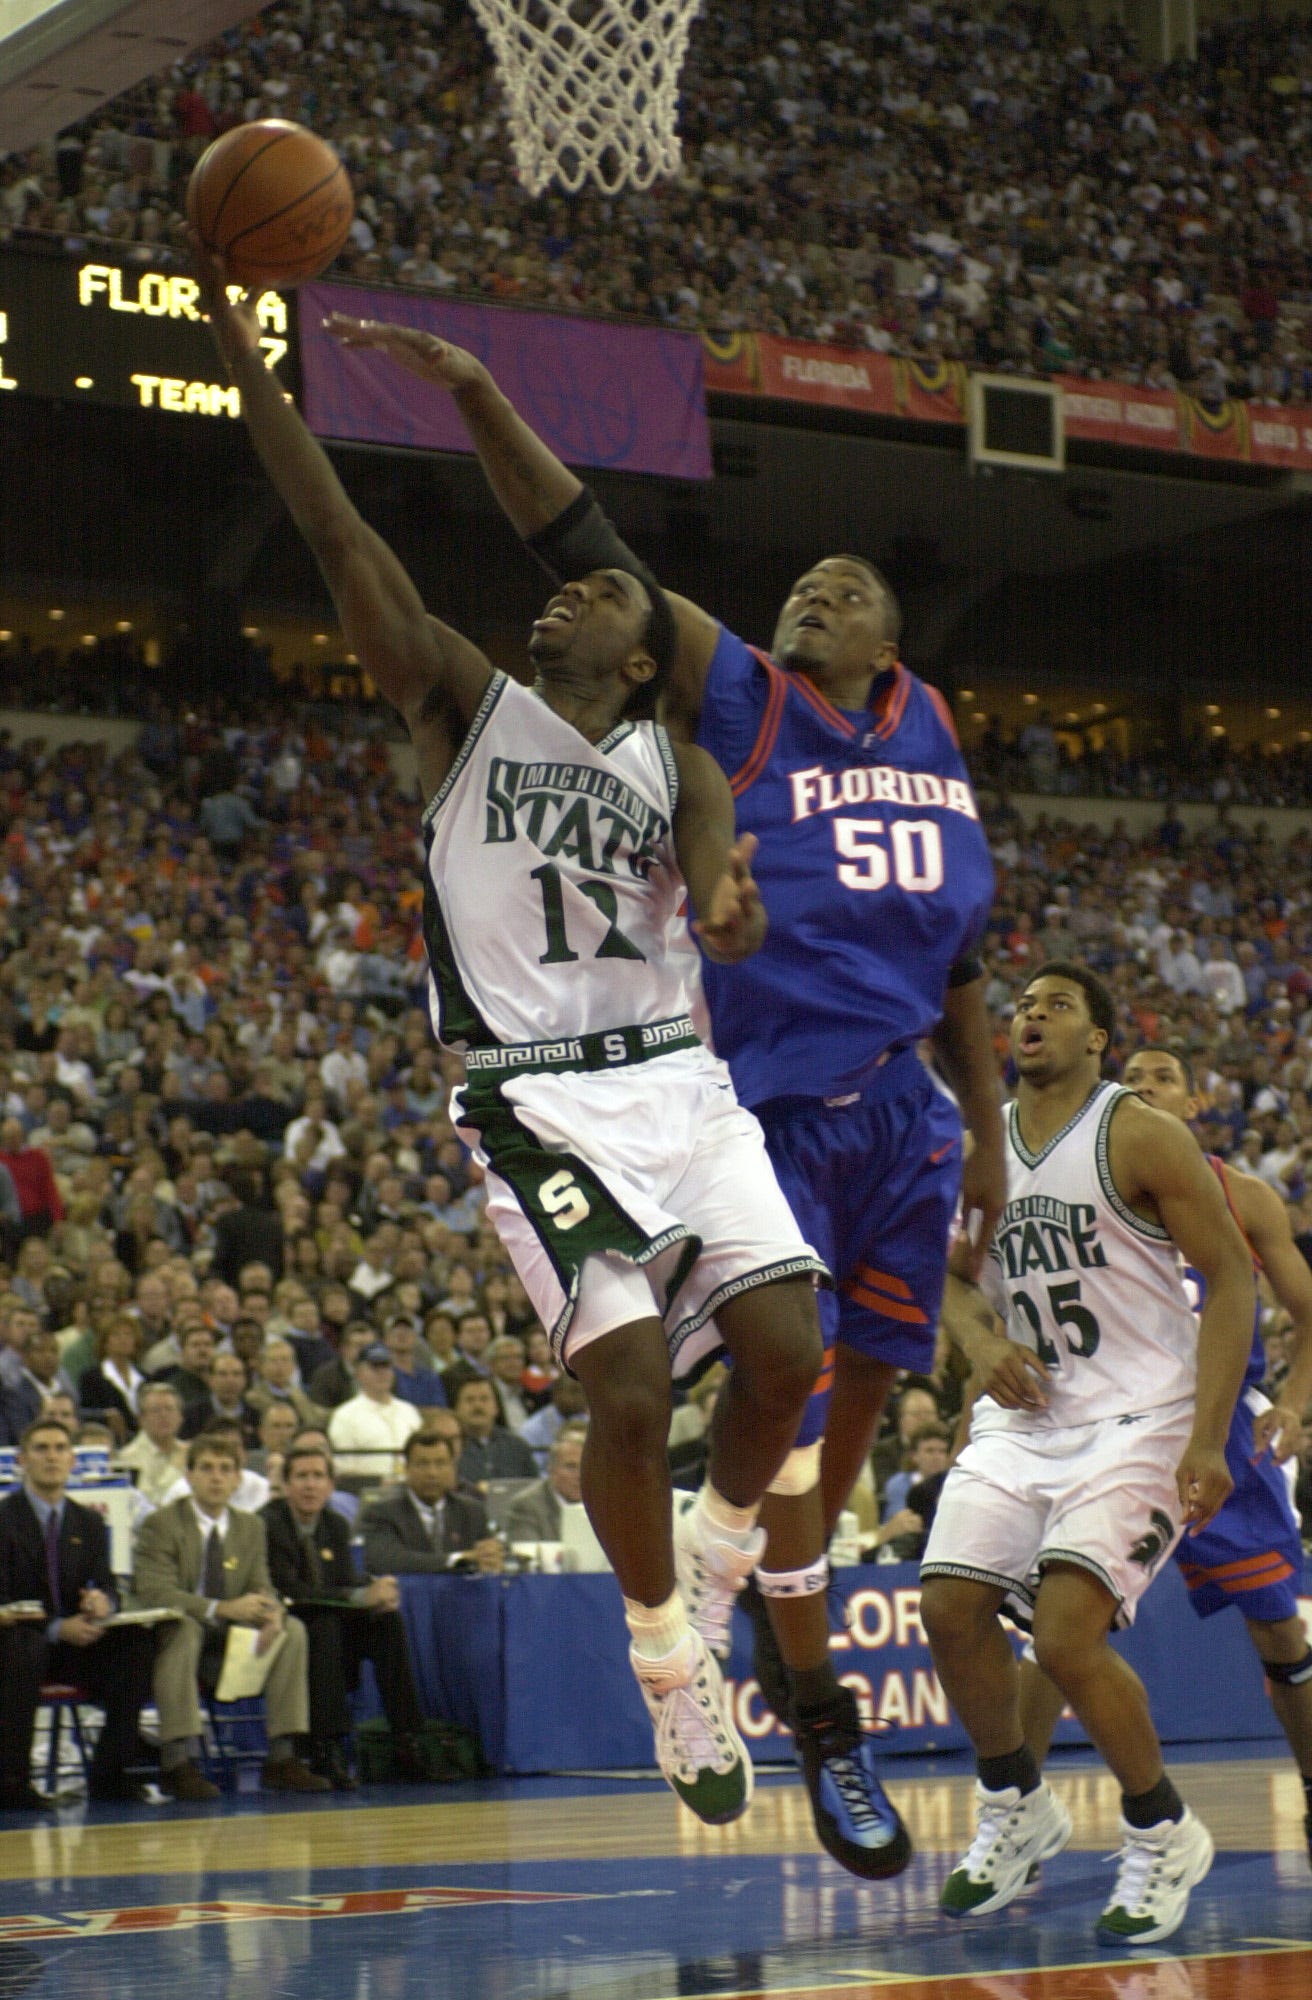 Michigan State ' s Mateen Cleaves drives to the hoop for a layup as Florida ' s Udonis Haslem tries to block the ball from behind in the 2000 NCAA national title game.